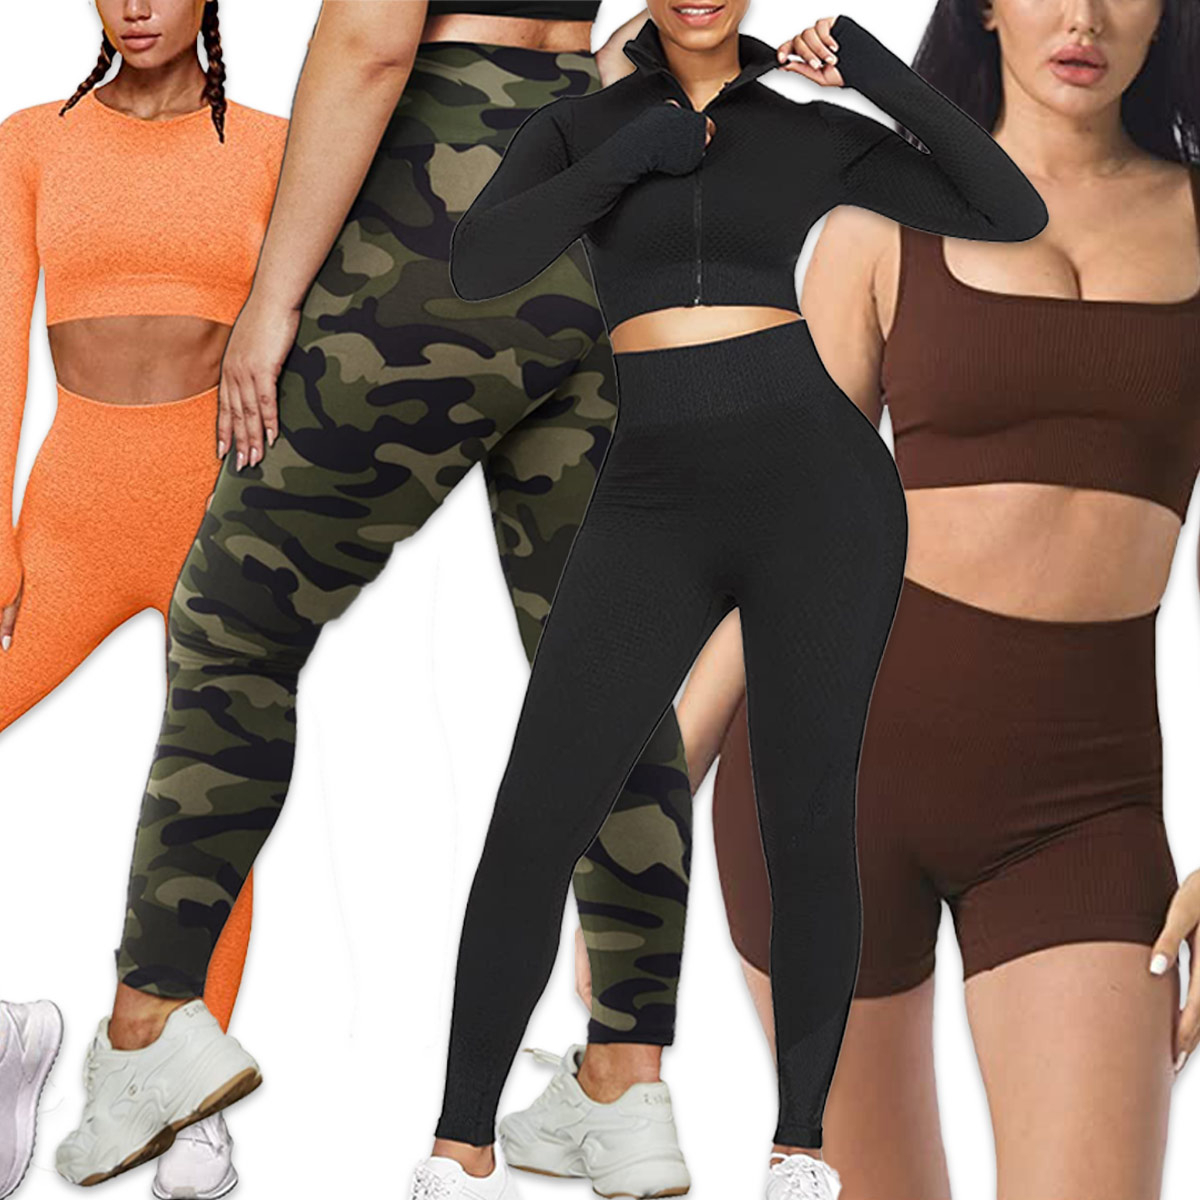 Shop the Cutest Under $50 Workout Sets From Amazon to Break a Sweat in Style – E! Online